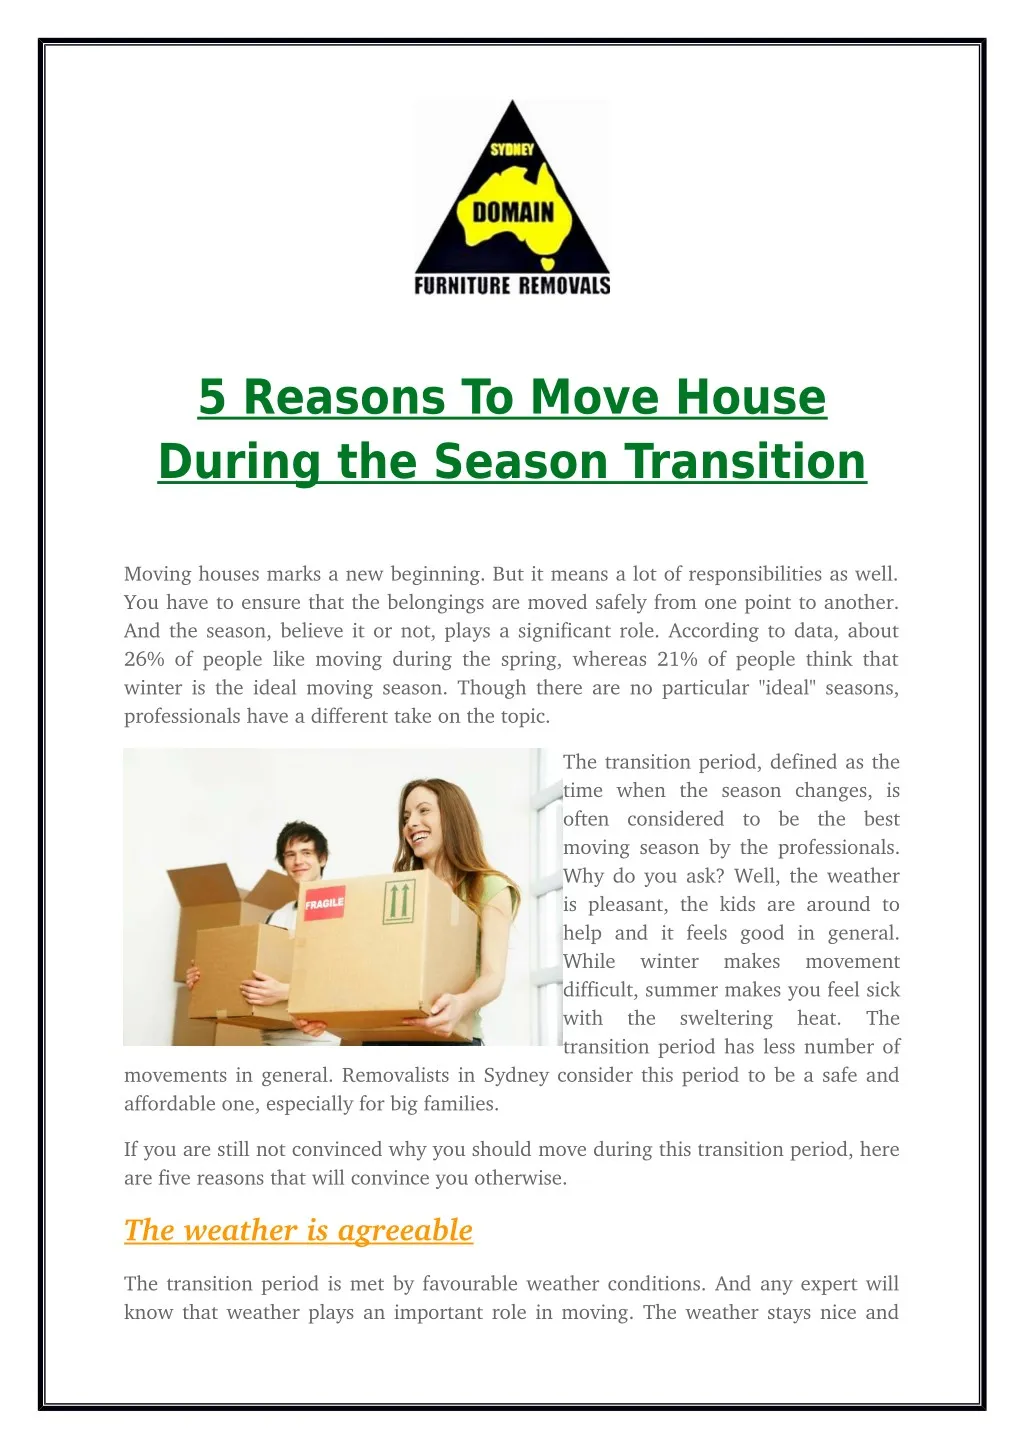 5 reasons to move house during the season